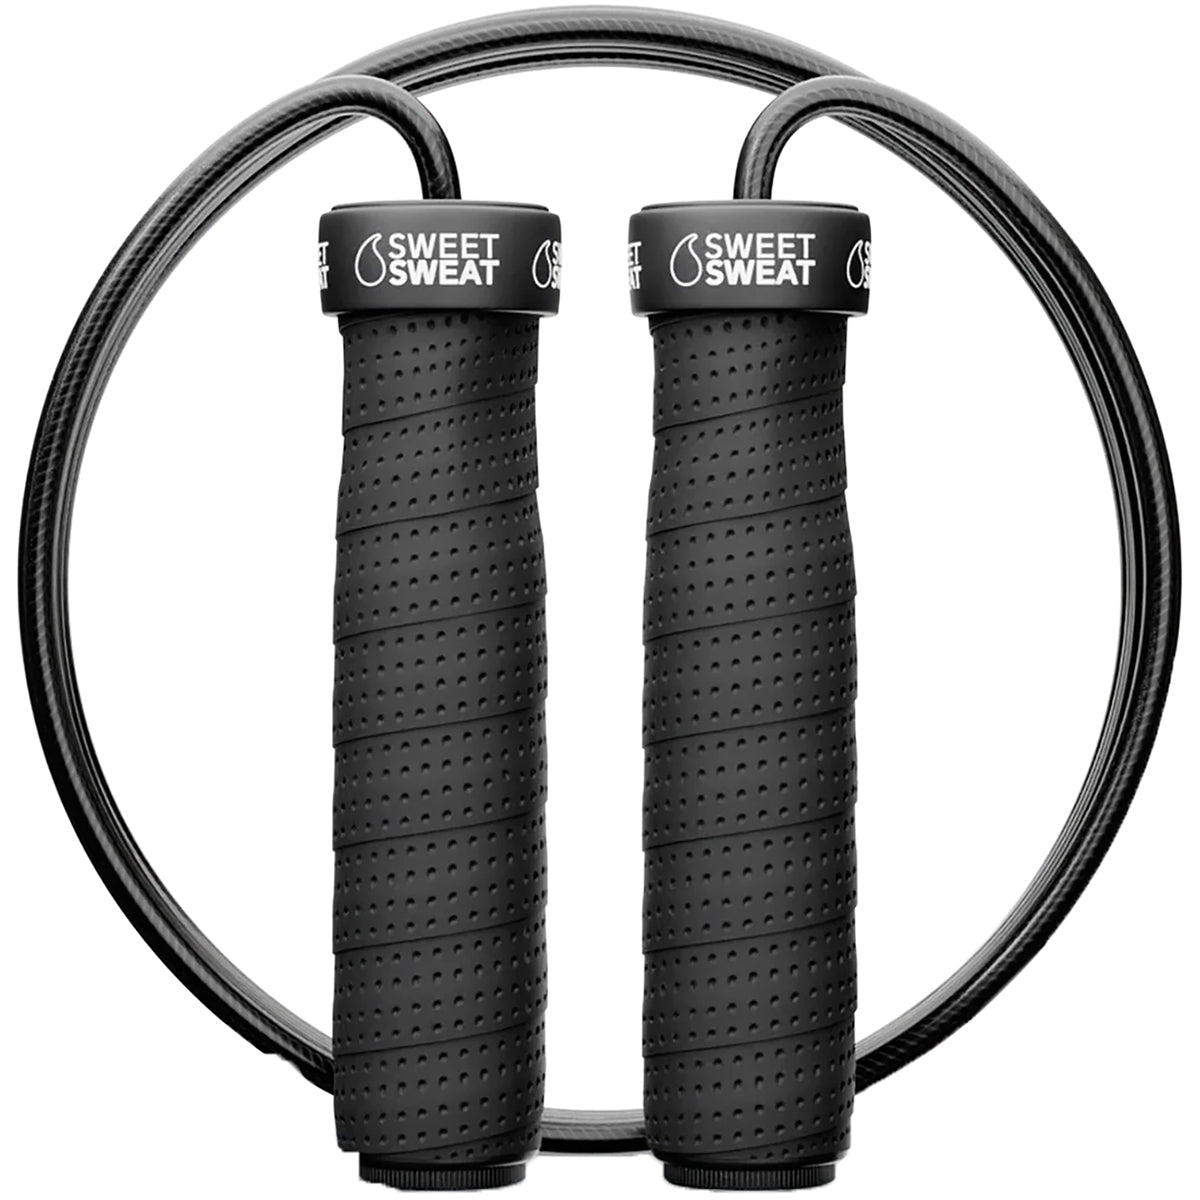 Sports Research Sweet Sweat Adjustable Length Cable Jump Rope Sports Research